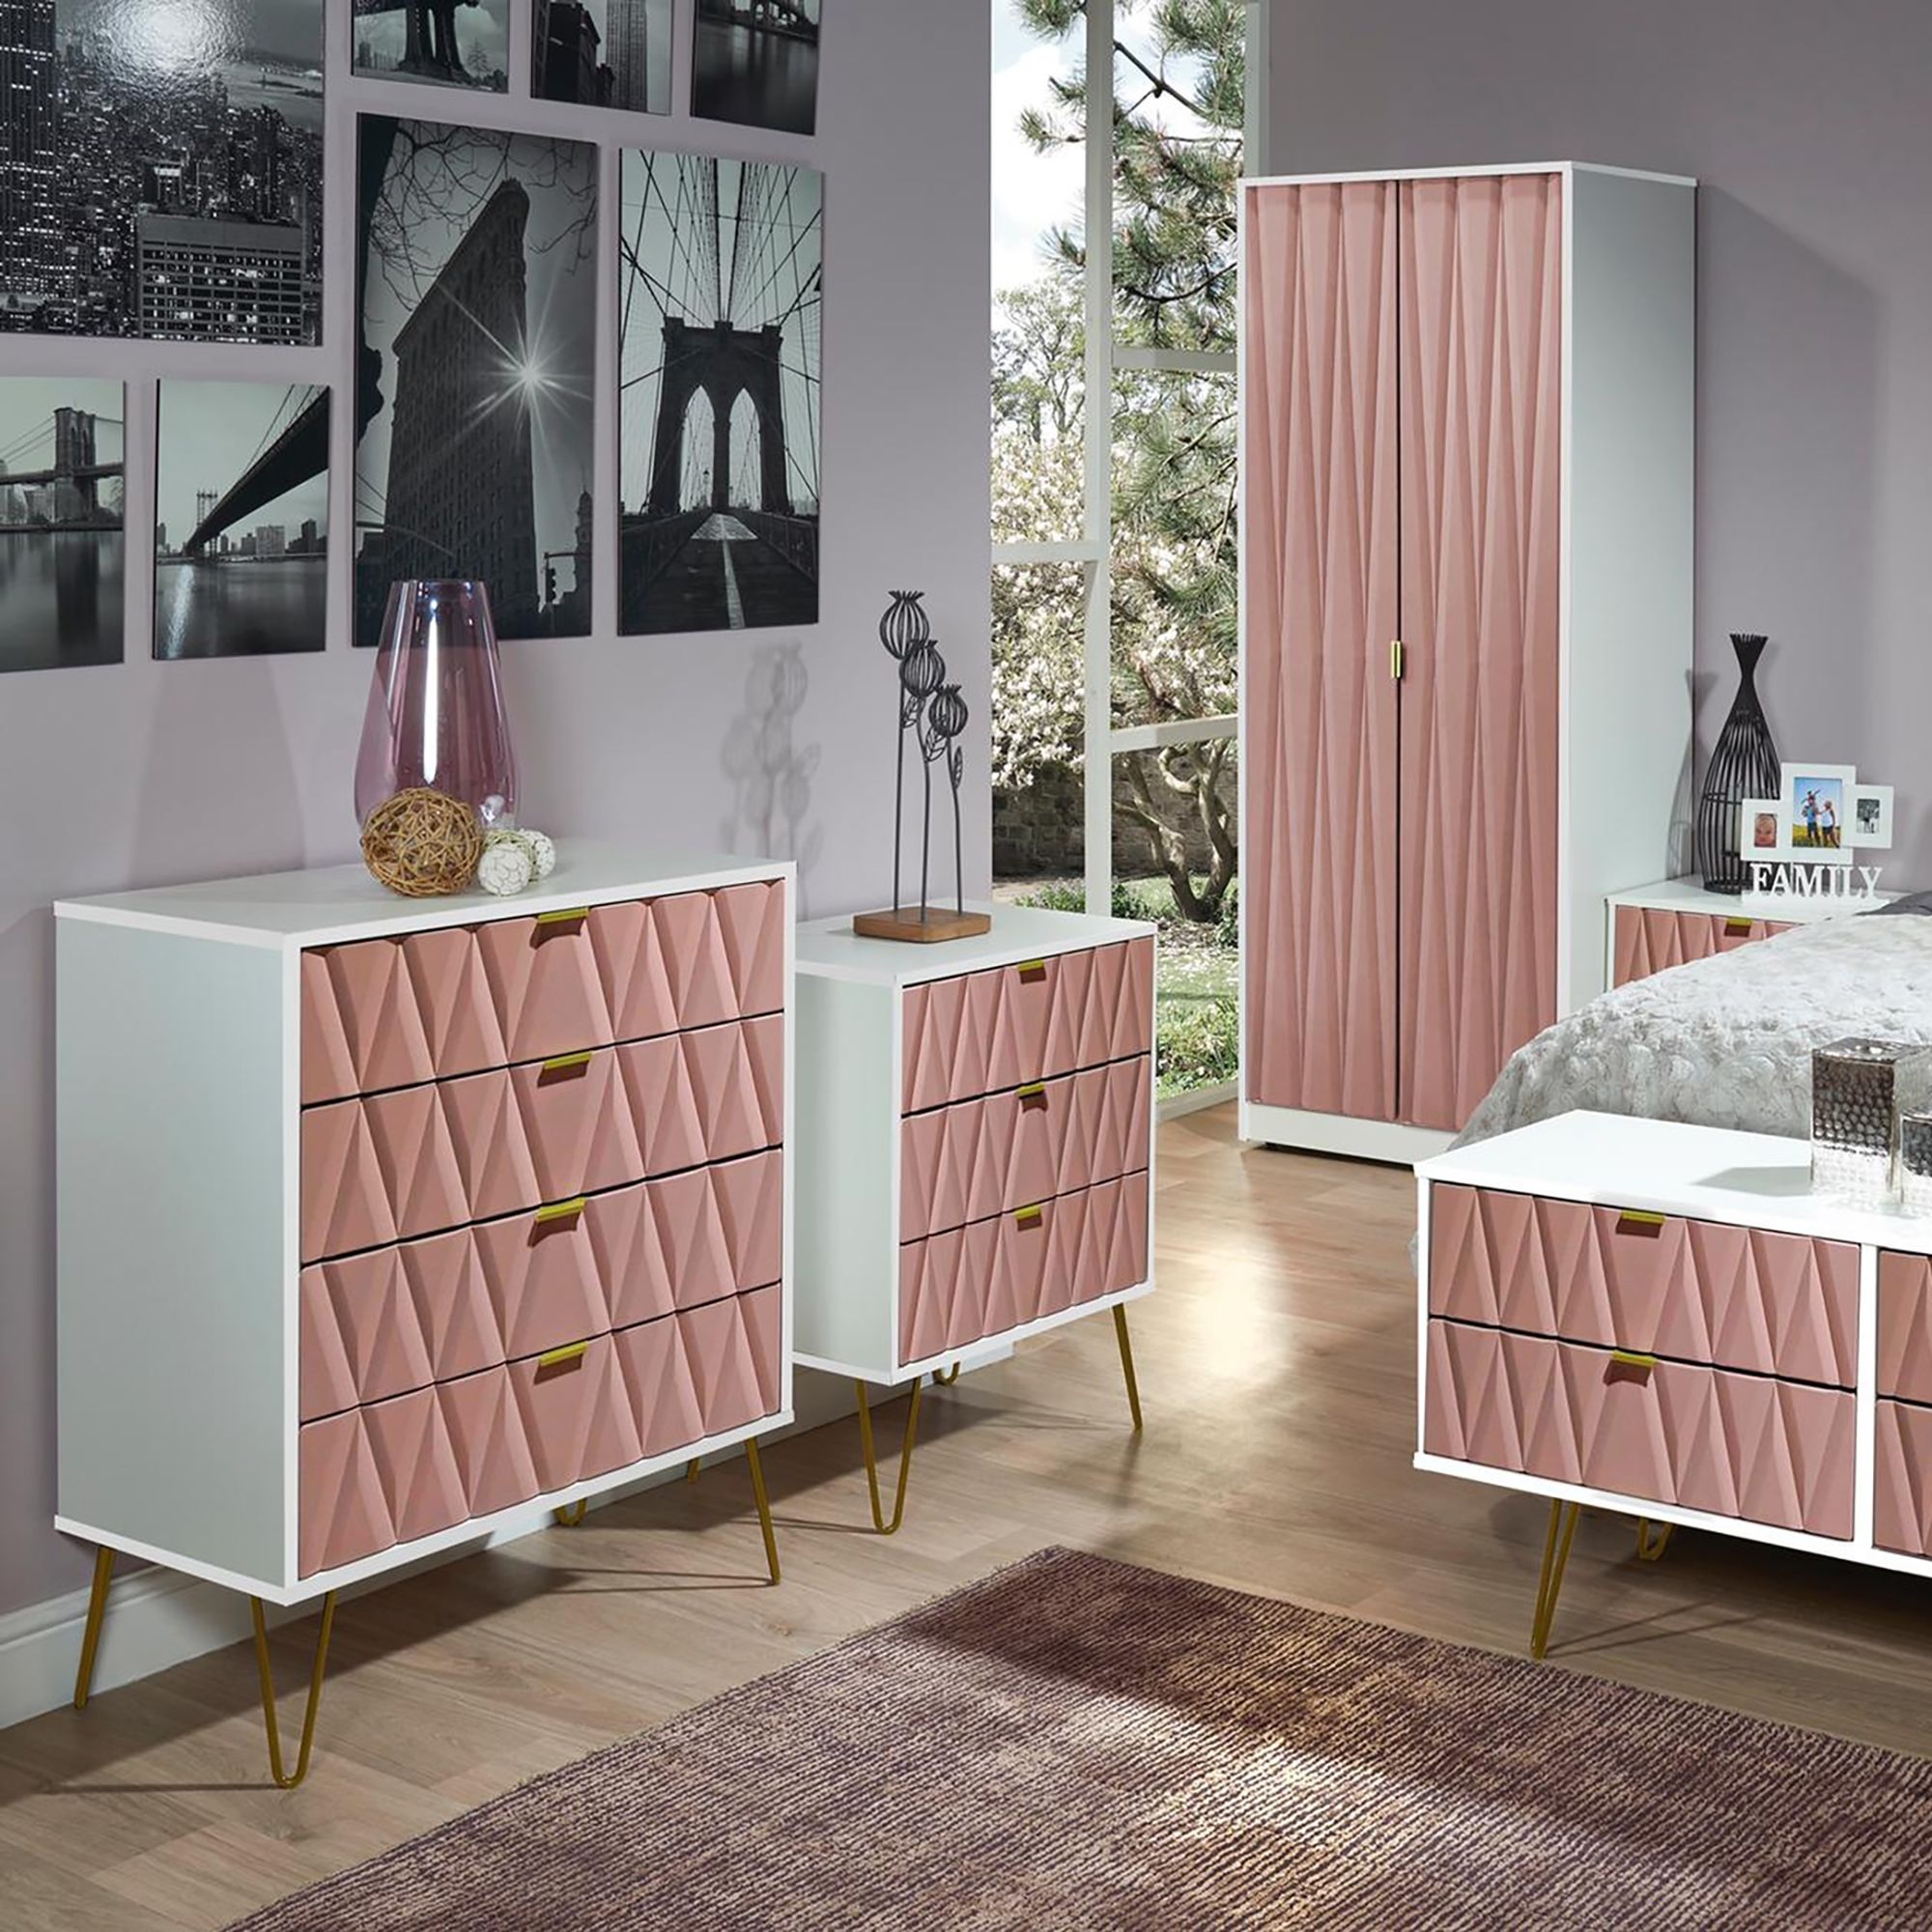 Diamond Pink & white 3 Drawer Chest of drawers (H)740mm (W)765mm (D)395mm